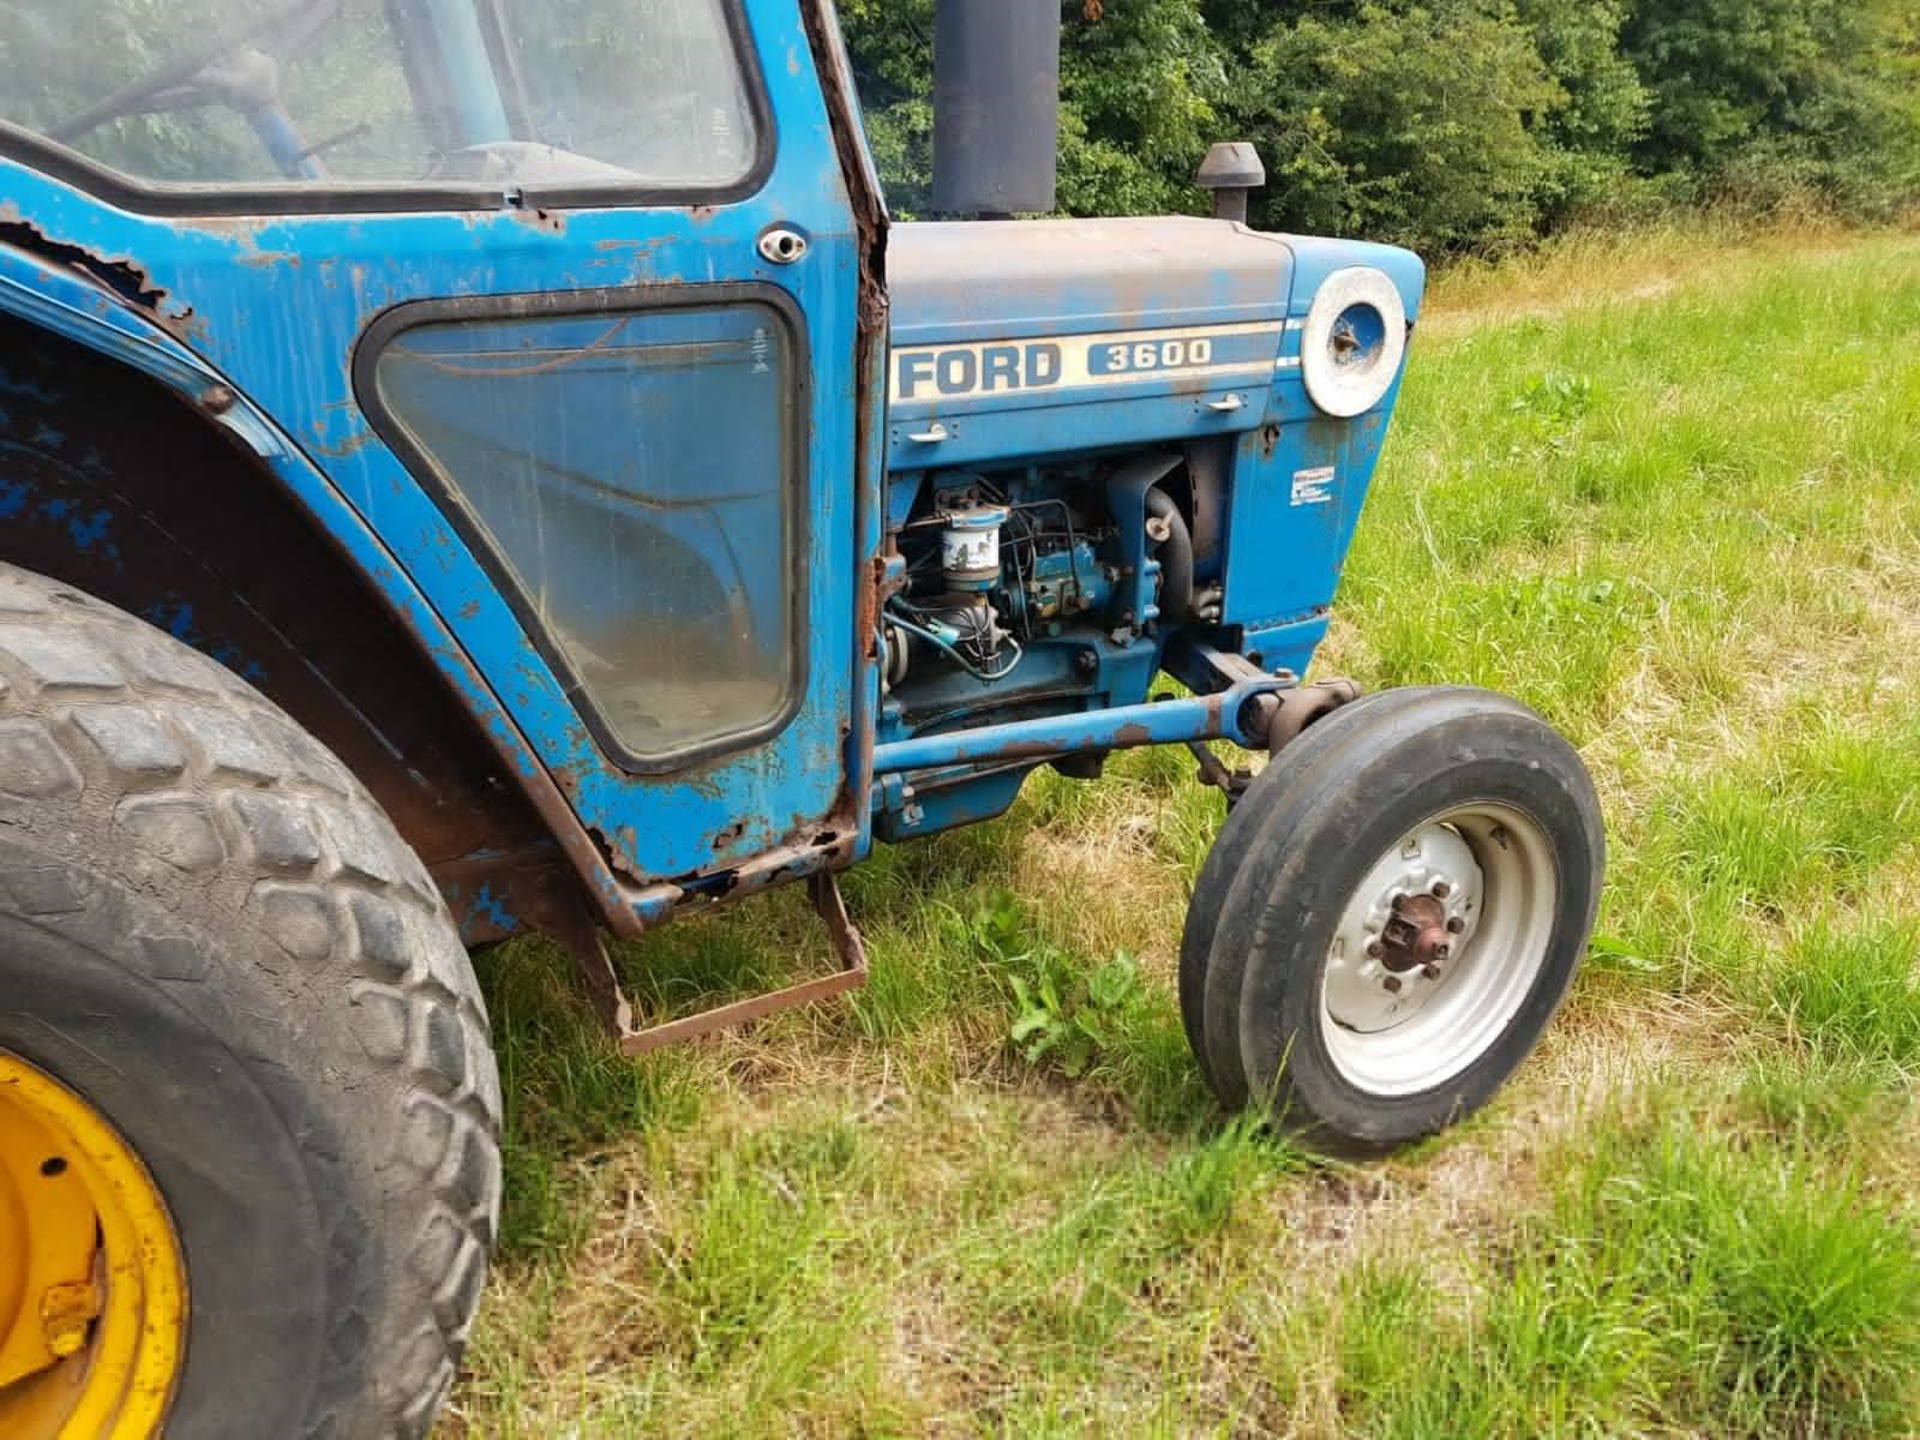 Ford 3600 Tractor - Image 11 of 12